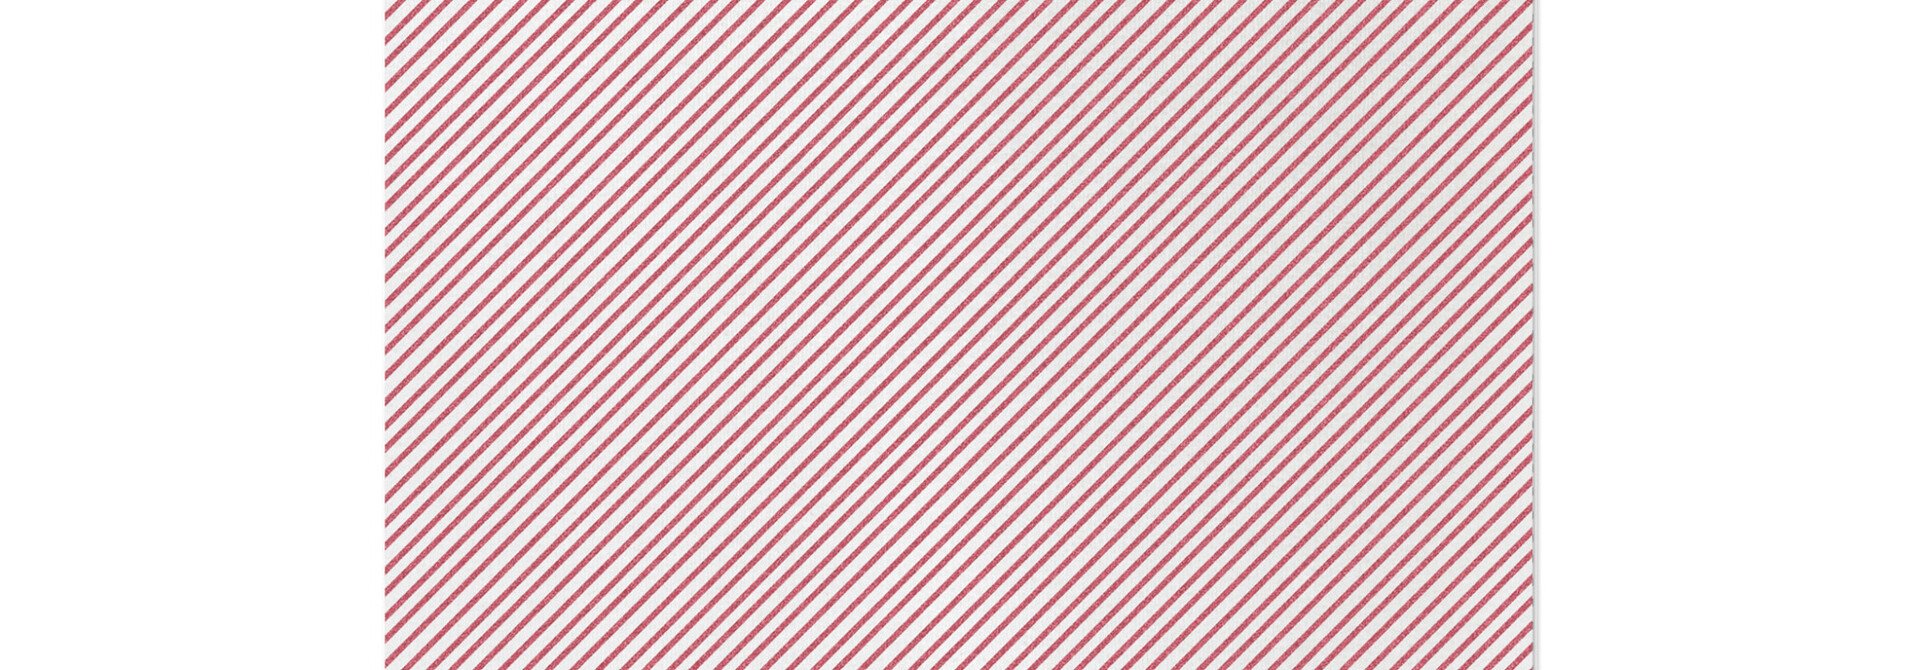 Seersucker Stripe | The Papersoft Dinner Napkin Collection Pack of 50, Red